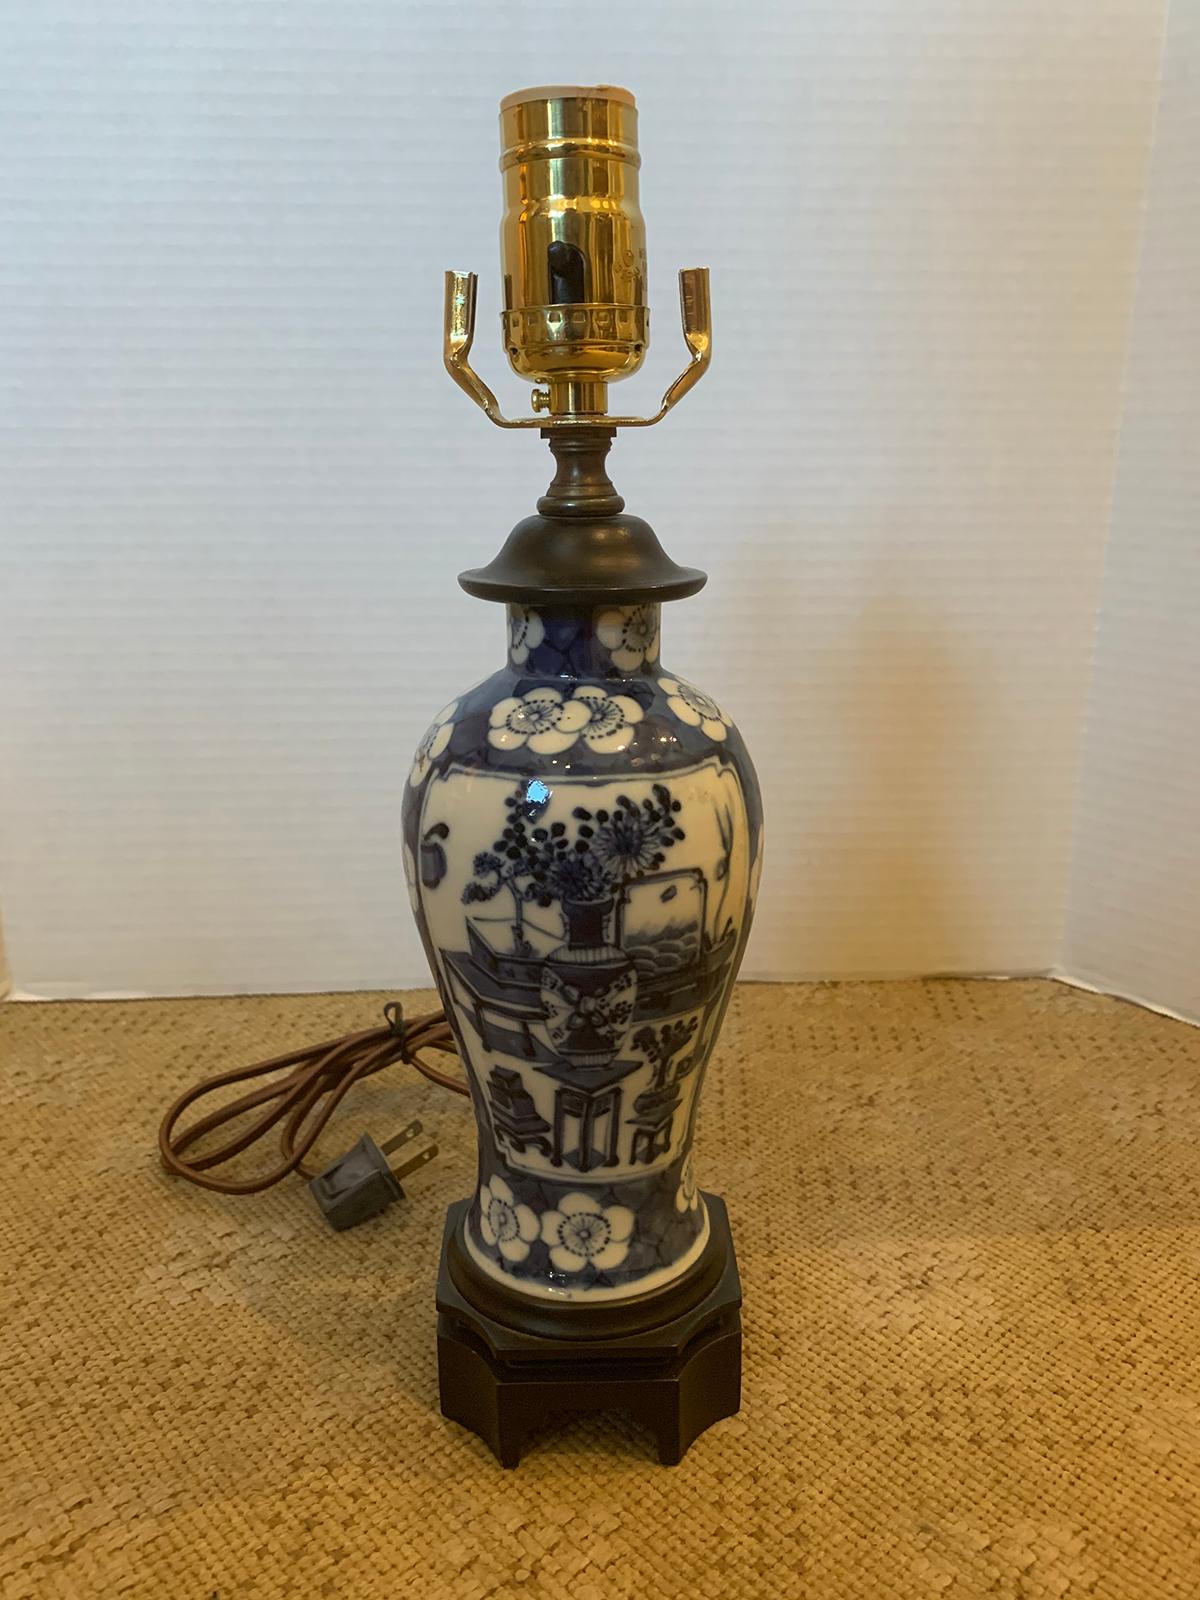 19th-20th century blue & white porcelain vase as lamp
New wiring
Measures: Overall 3.75